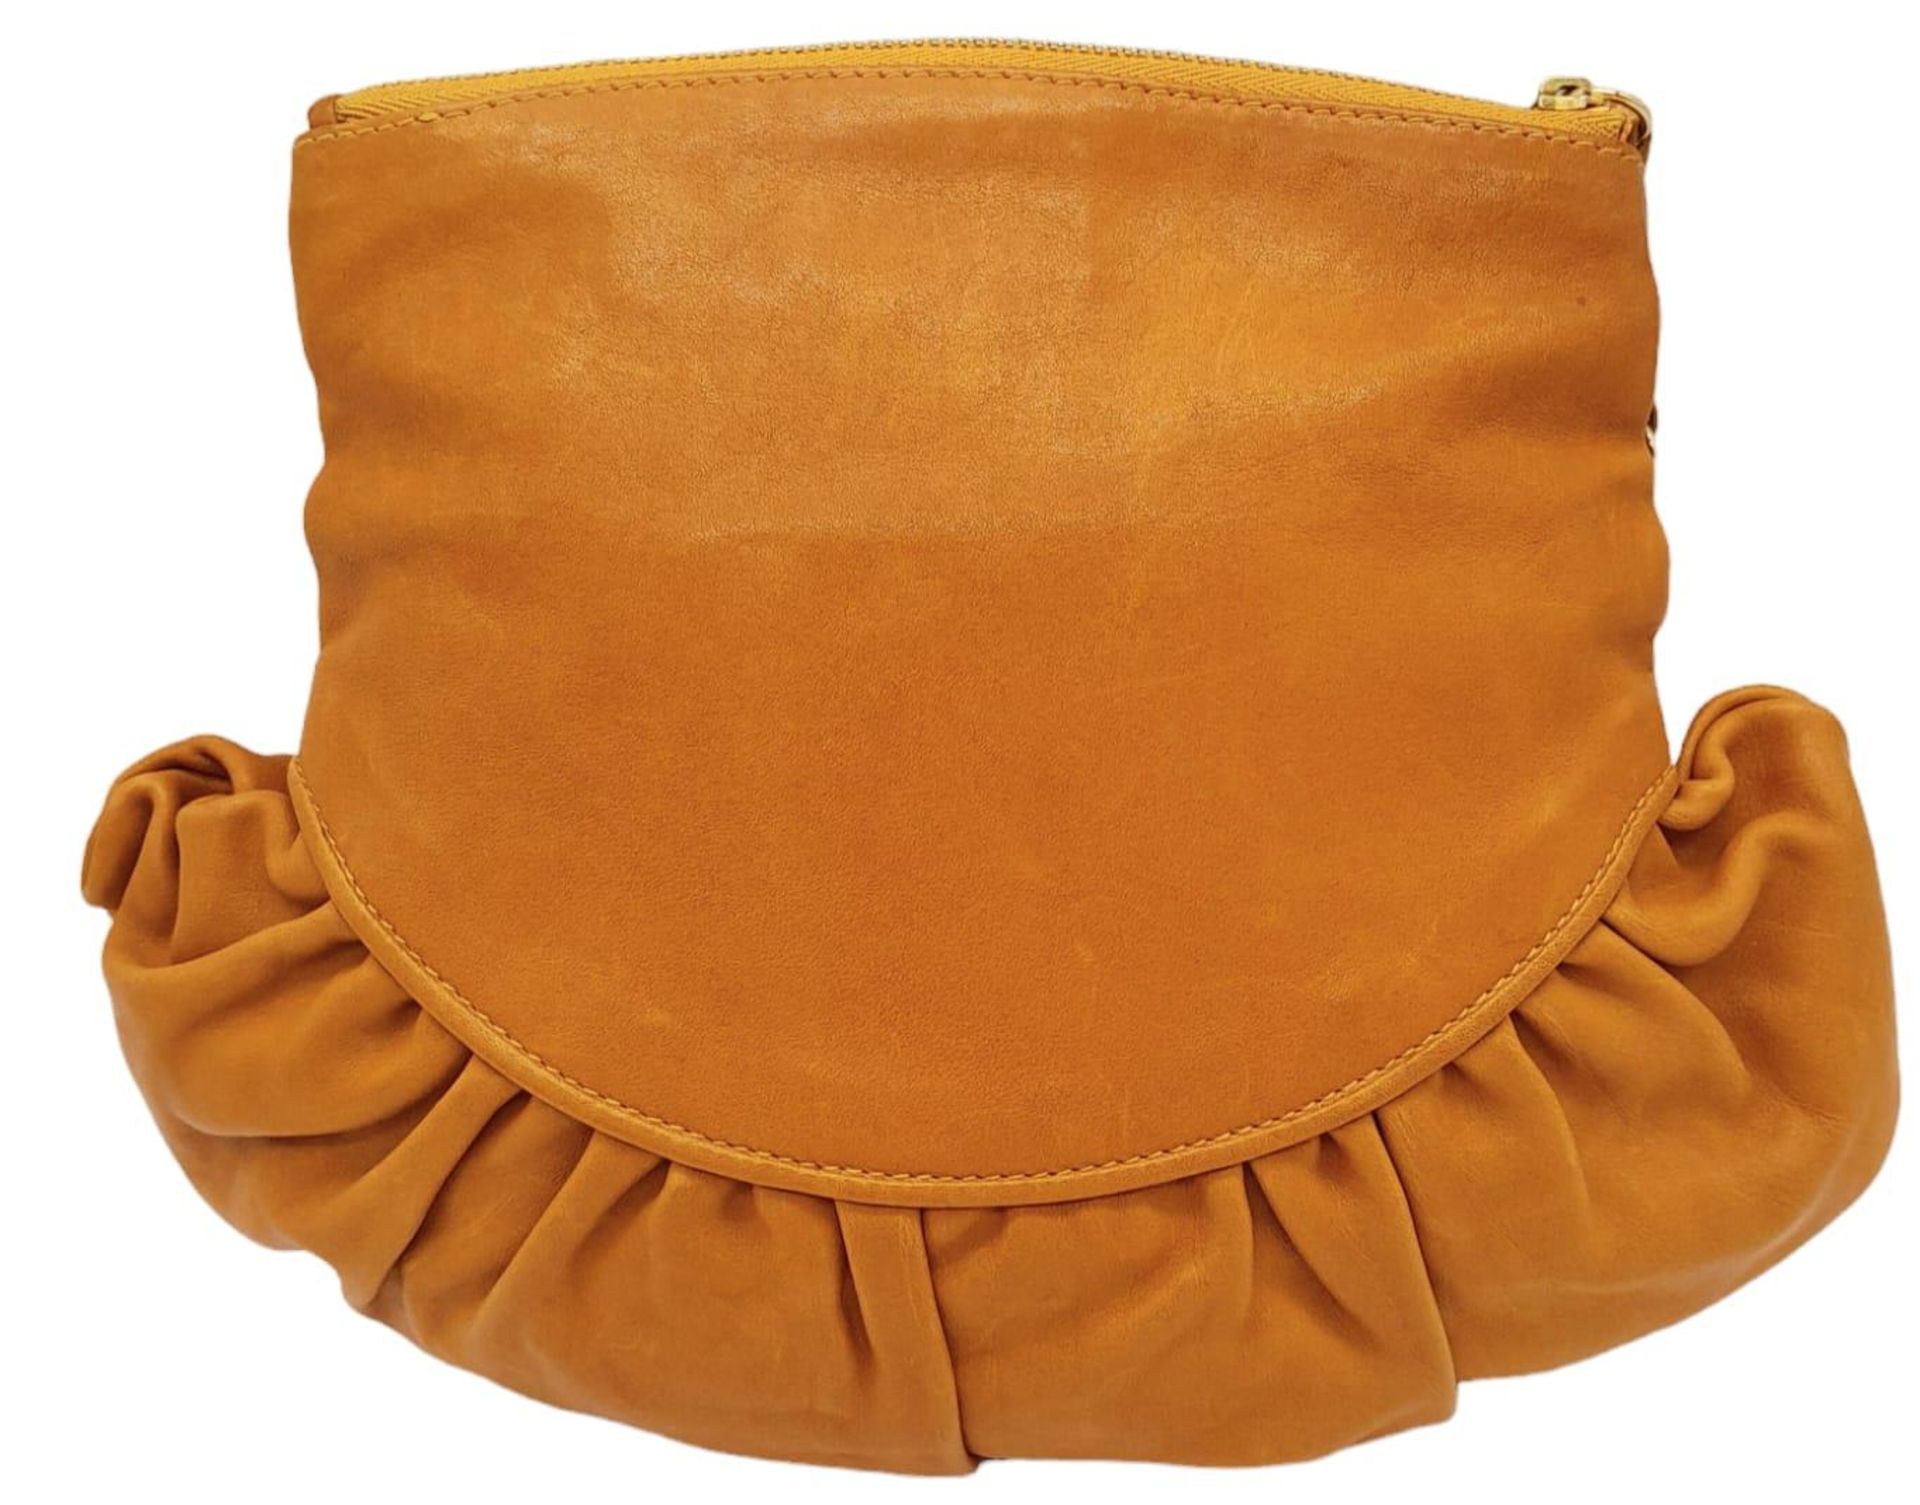 A Christian Dior Caramel Ruffled Clutch Bag. Leather exterior with gold-toned hardware and a - Image 3 of 9